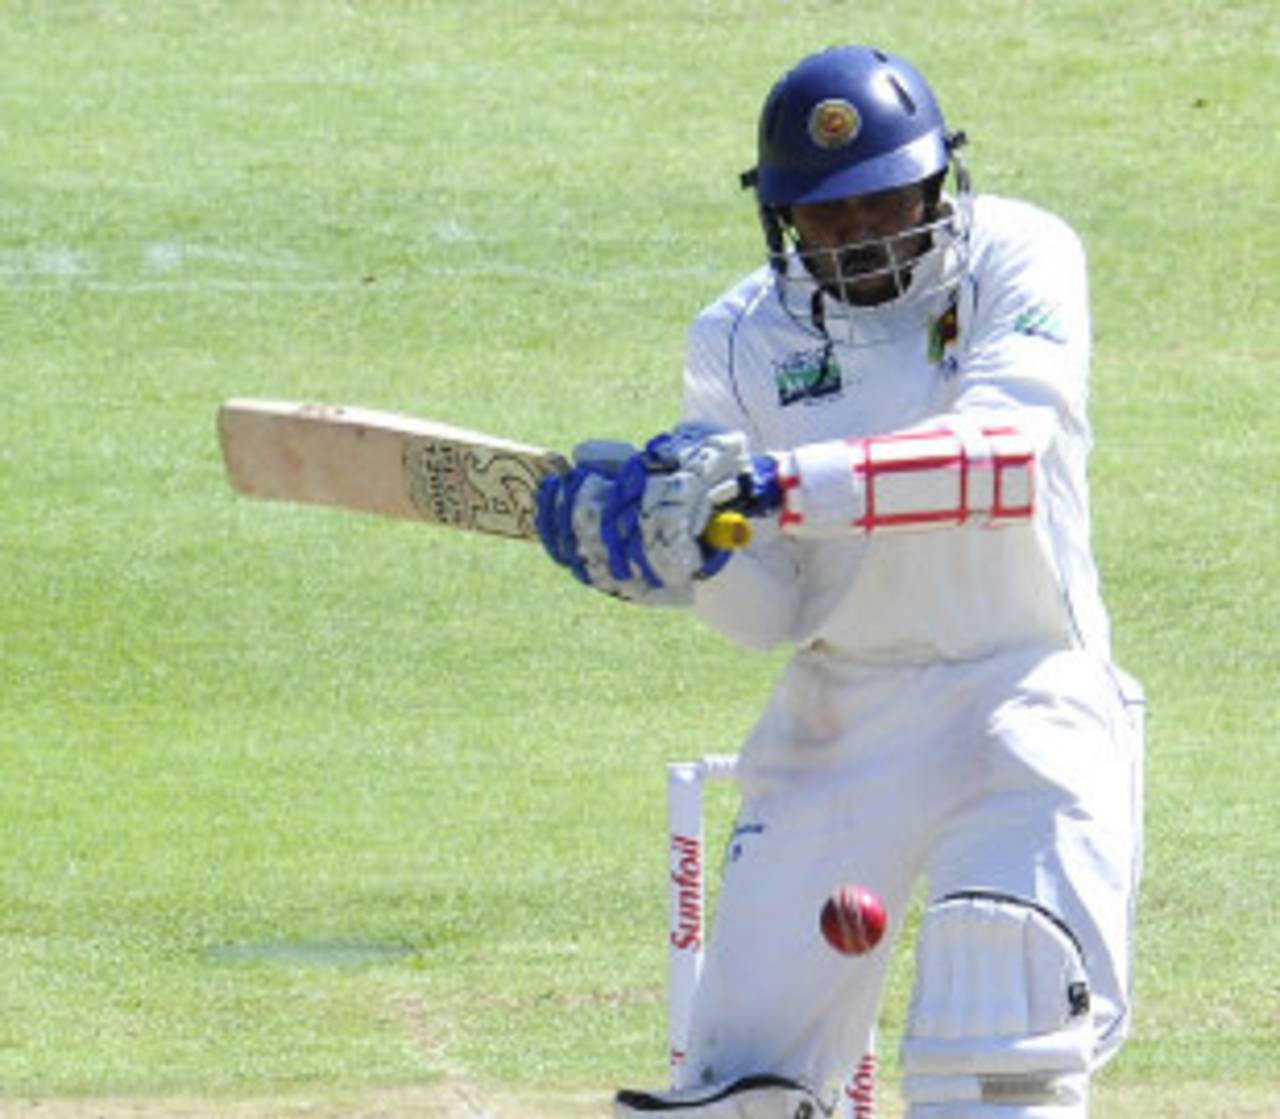 Tillakaratne Dilshan lines up a pull shot, South Africa v Sri Lanka, 3rd Test, Cape Town, 2nd day, January 4, 2012